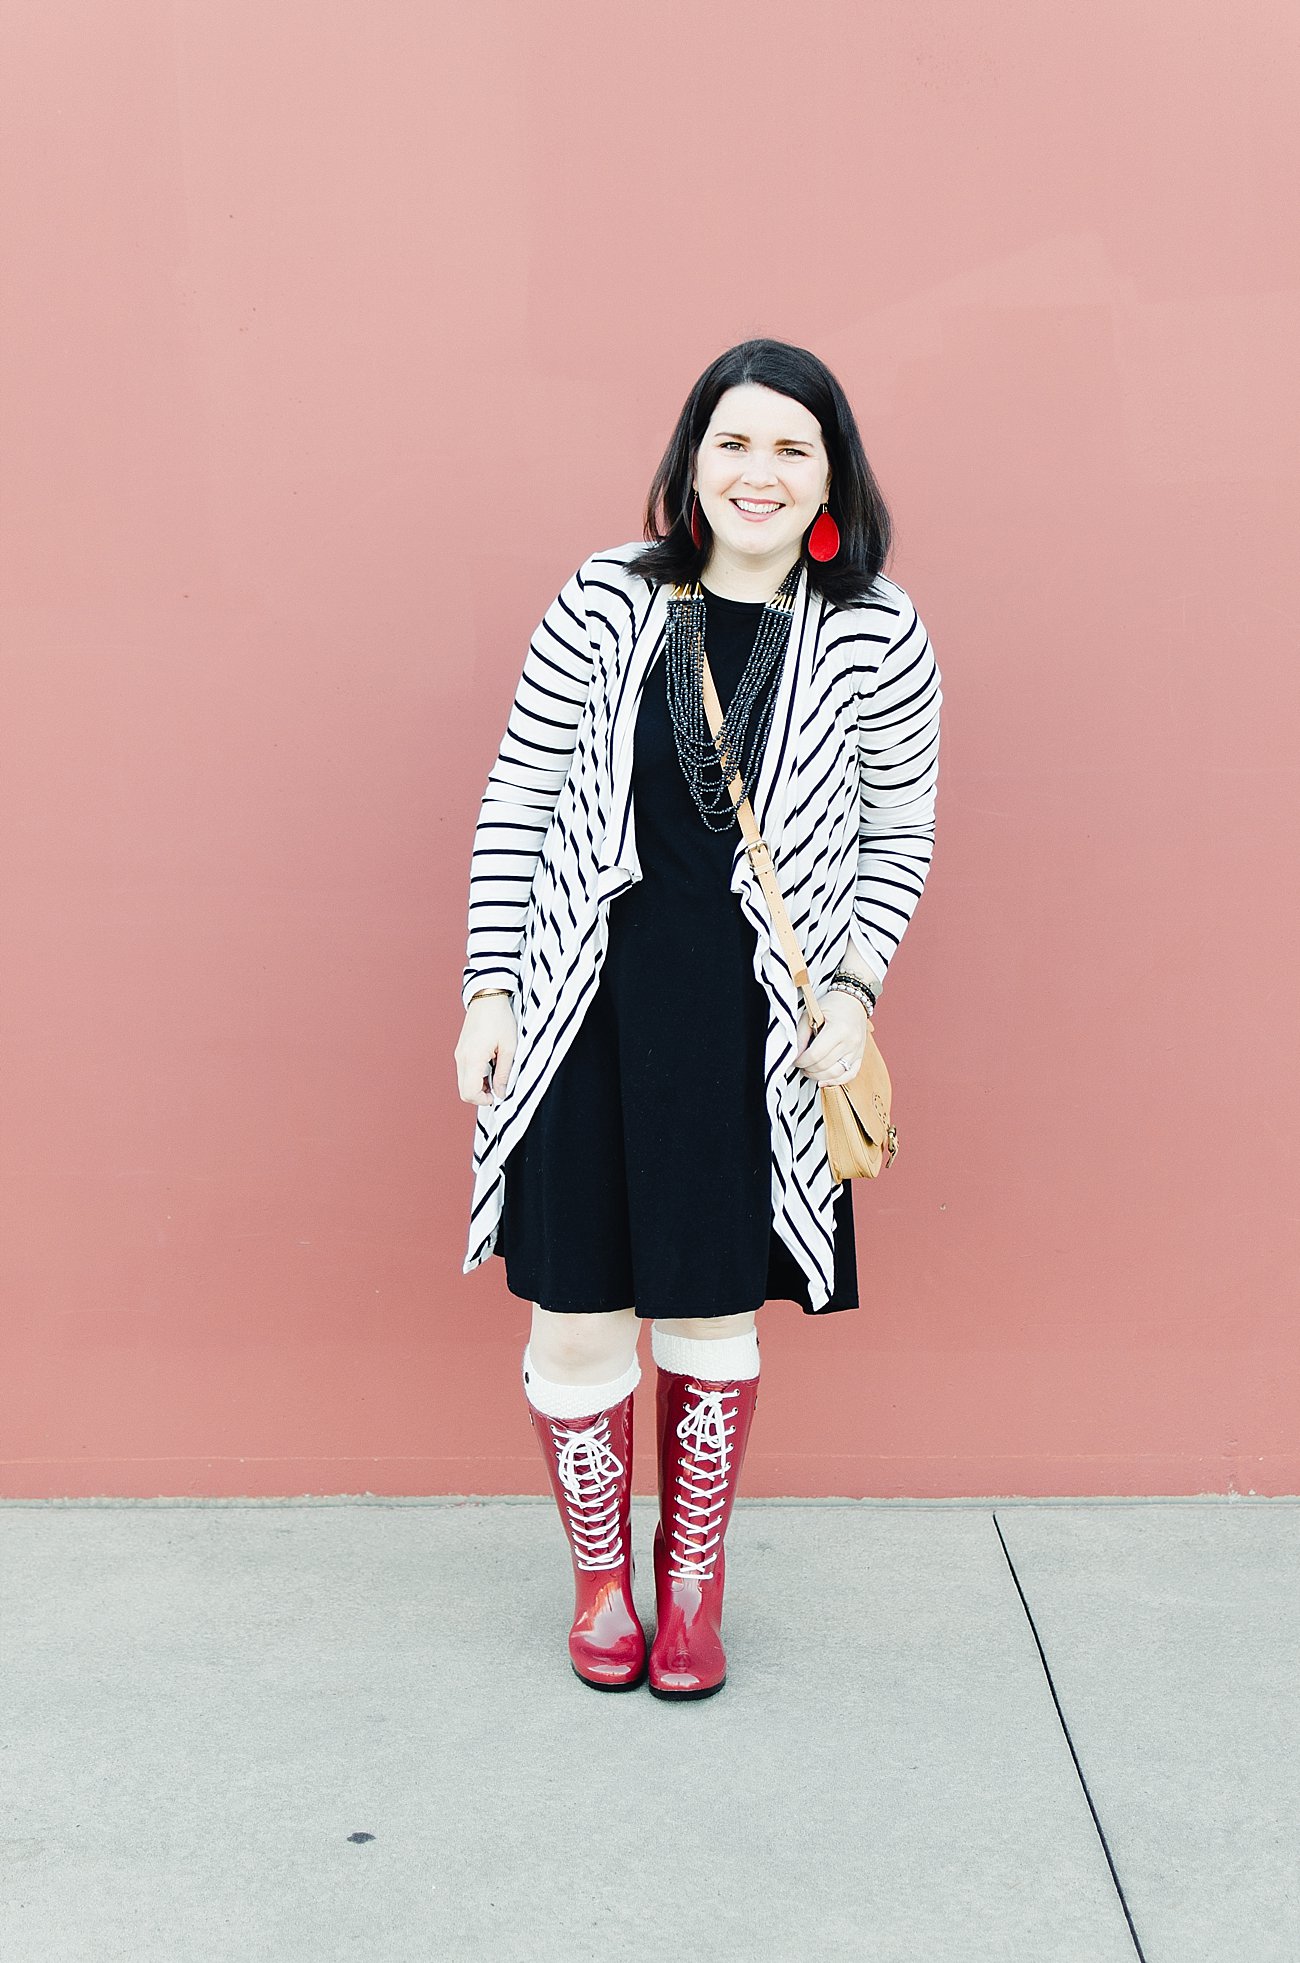 Roma Boots, LulaRoe Carly dress, Pinkblush Cardigan, Nickel and Suede Earrings, Noonday Collection exploration bag, Noonday Collection midnight necklace (2)